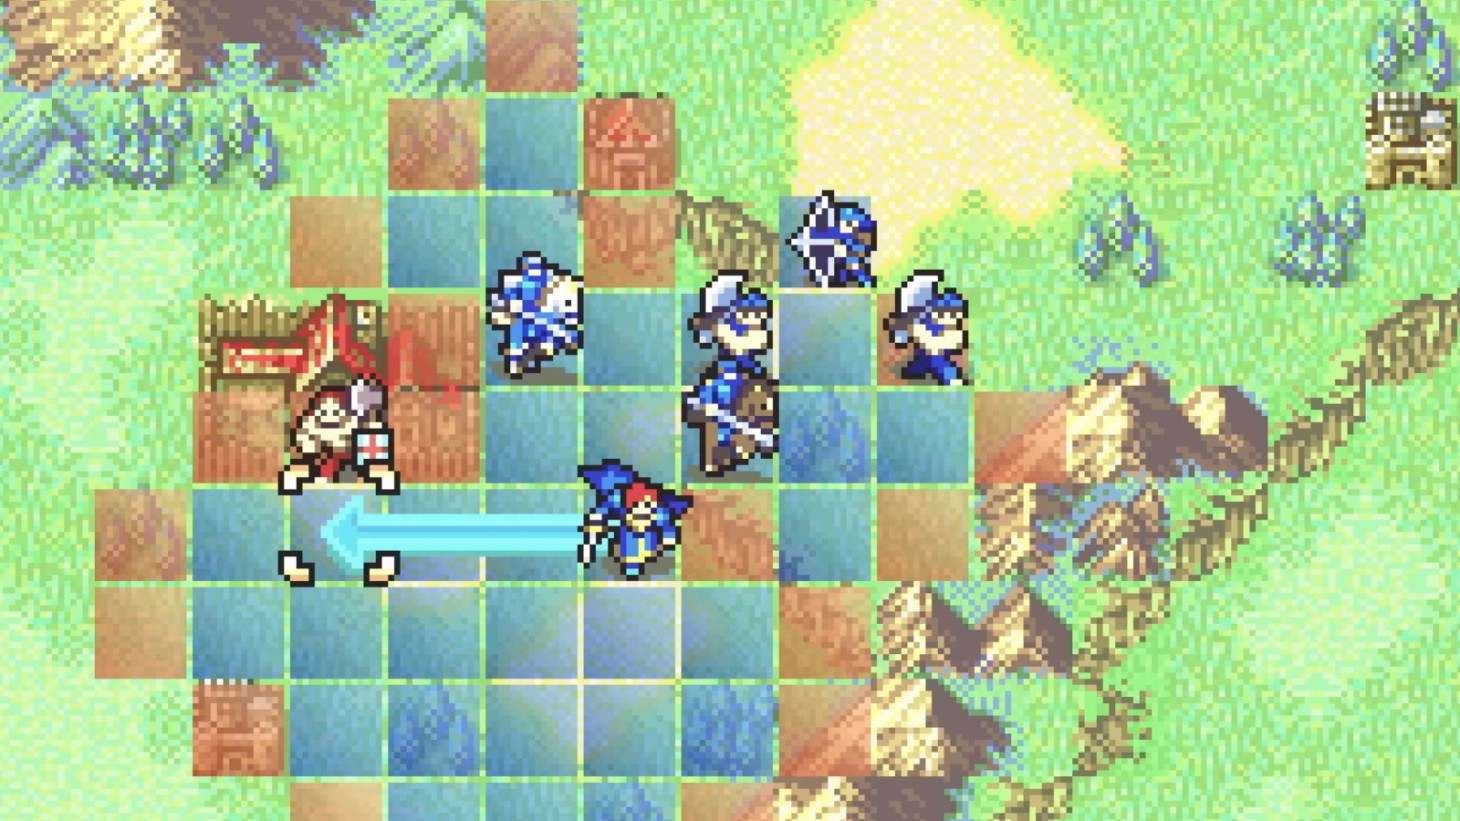 10 Fire Emblem Games To Replay Before Engage